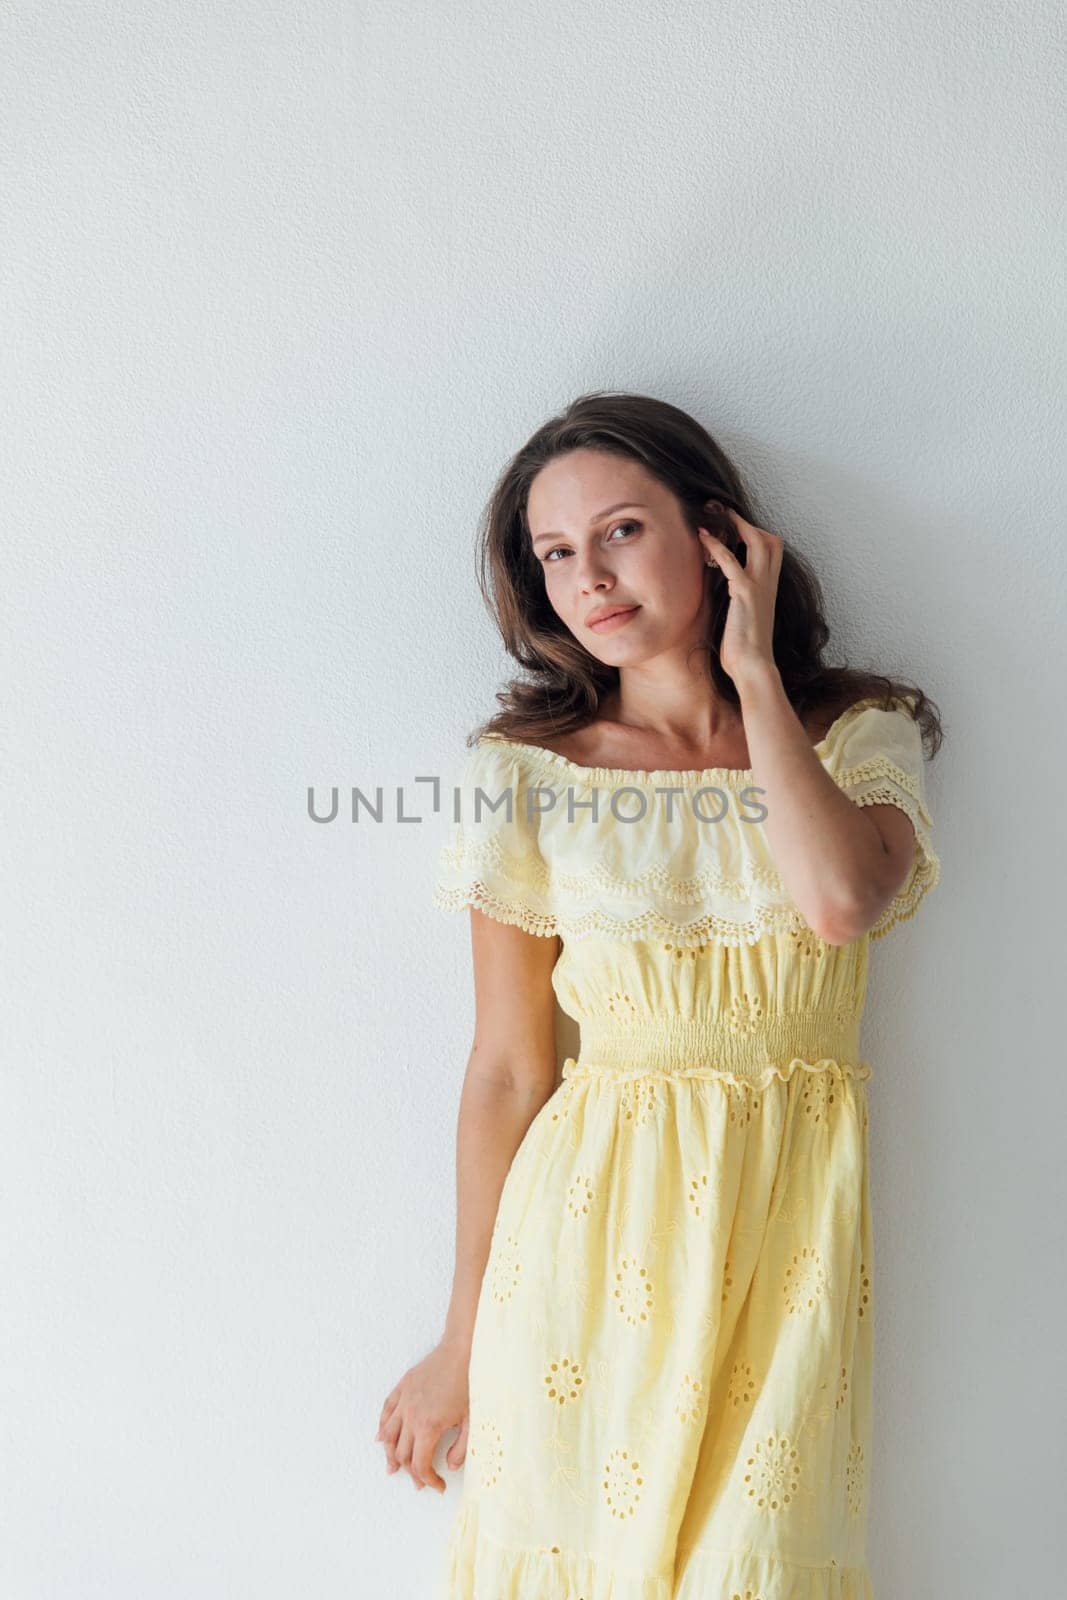 woman in a yellow dress on a white background poses